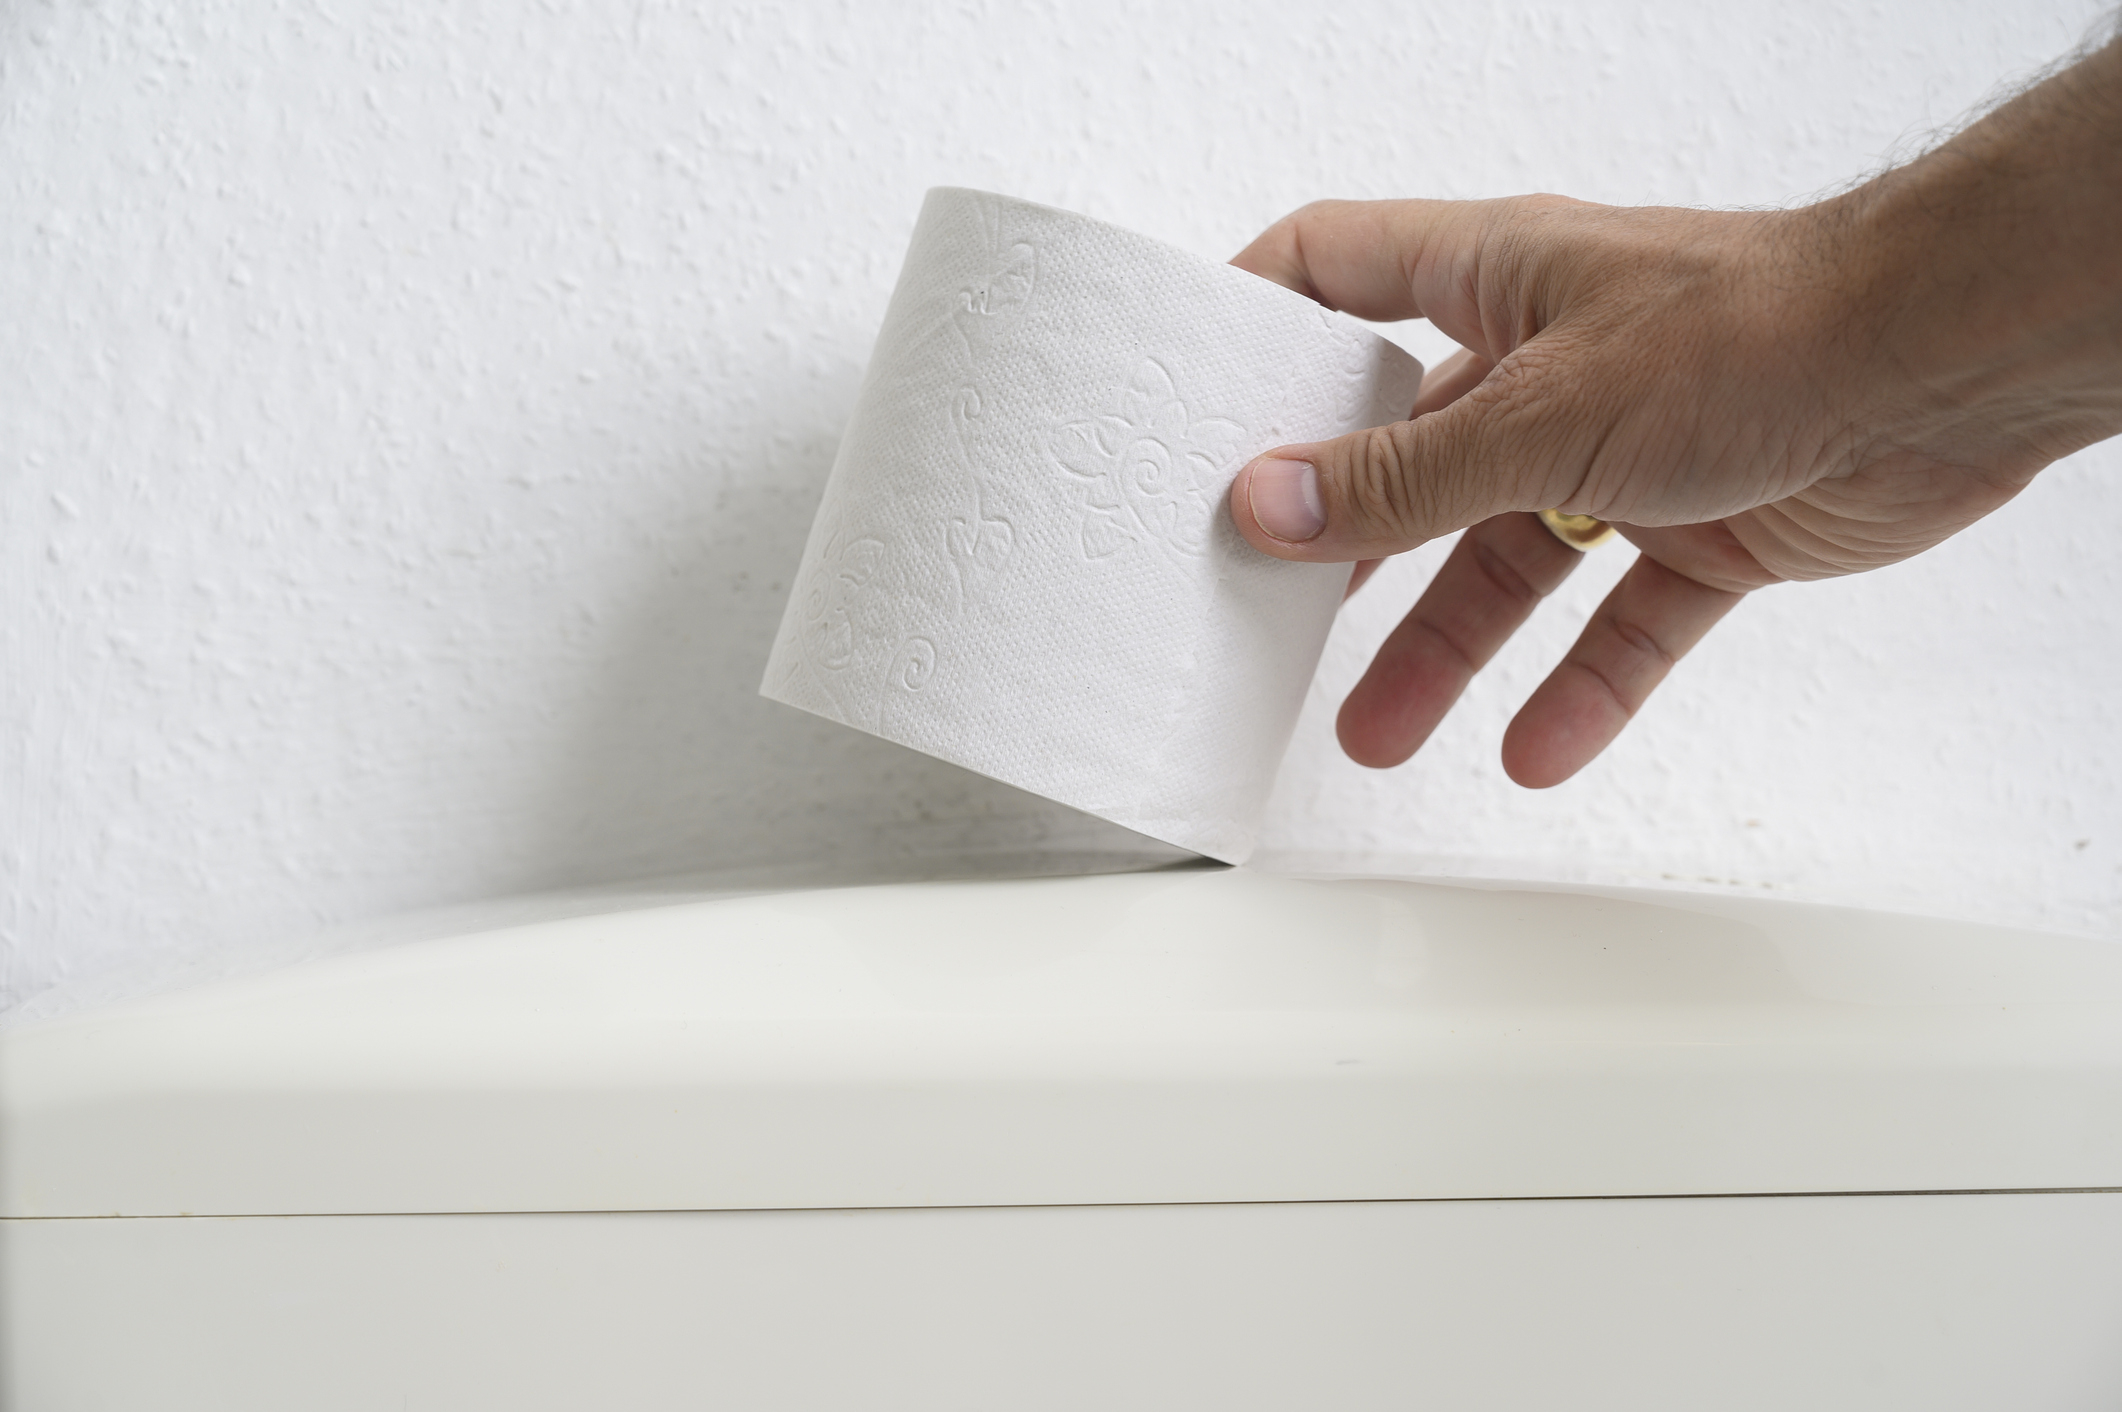 Hand grabbing toilet paper from the top of a toilet tank